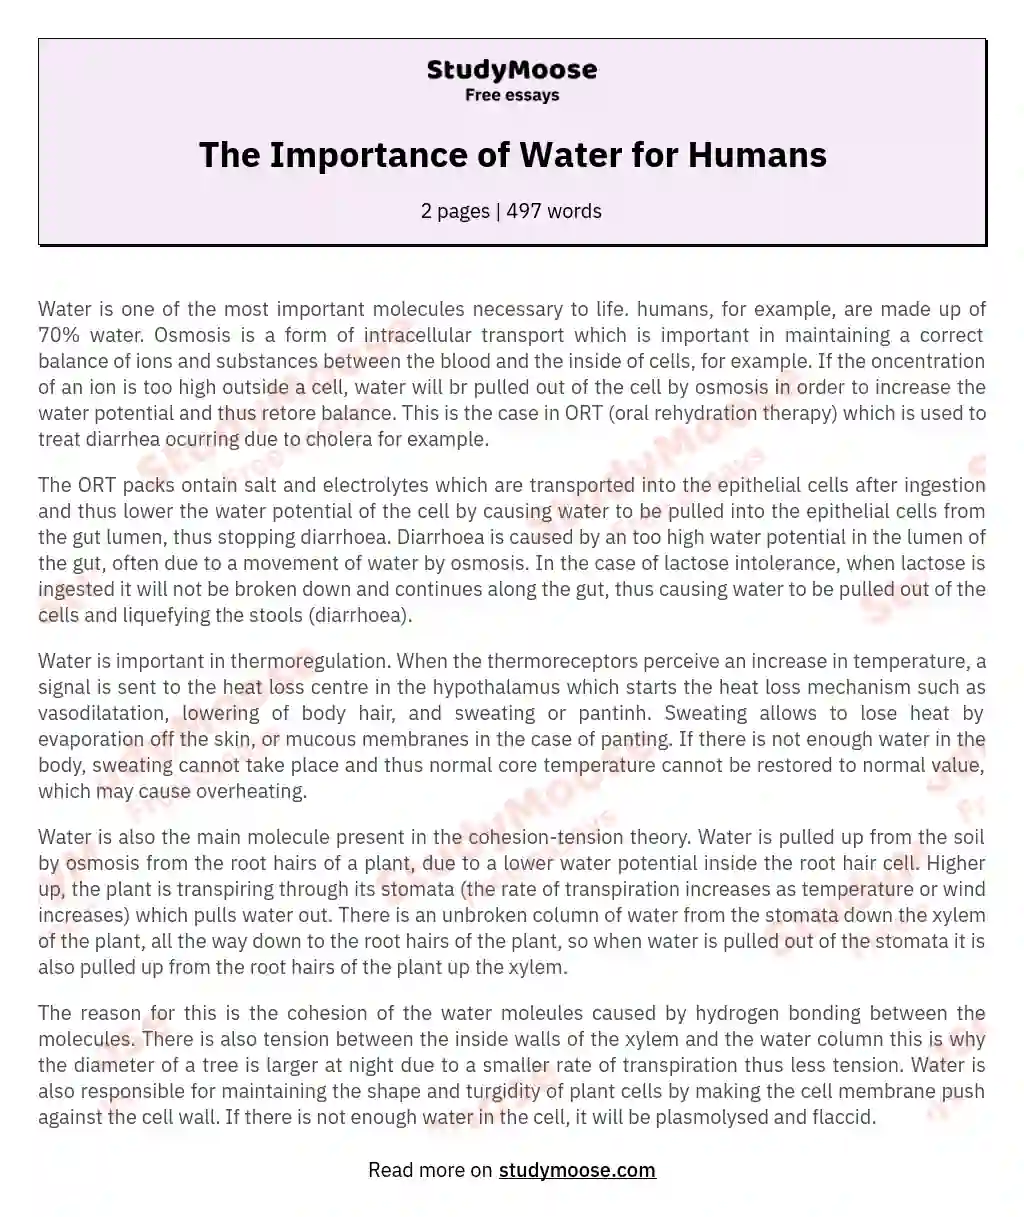 The Importance of Water for Humans essay